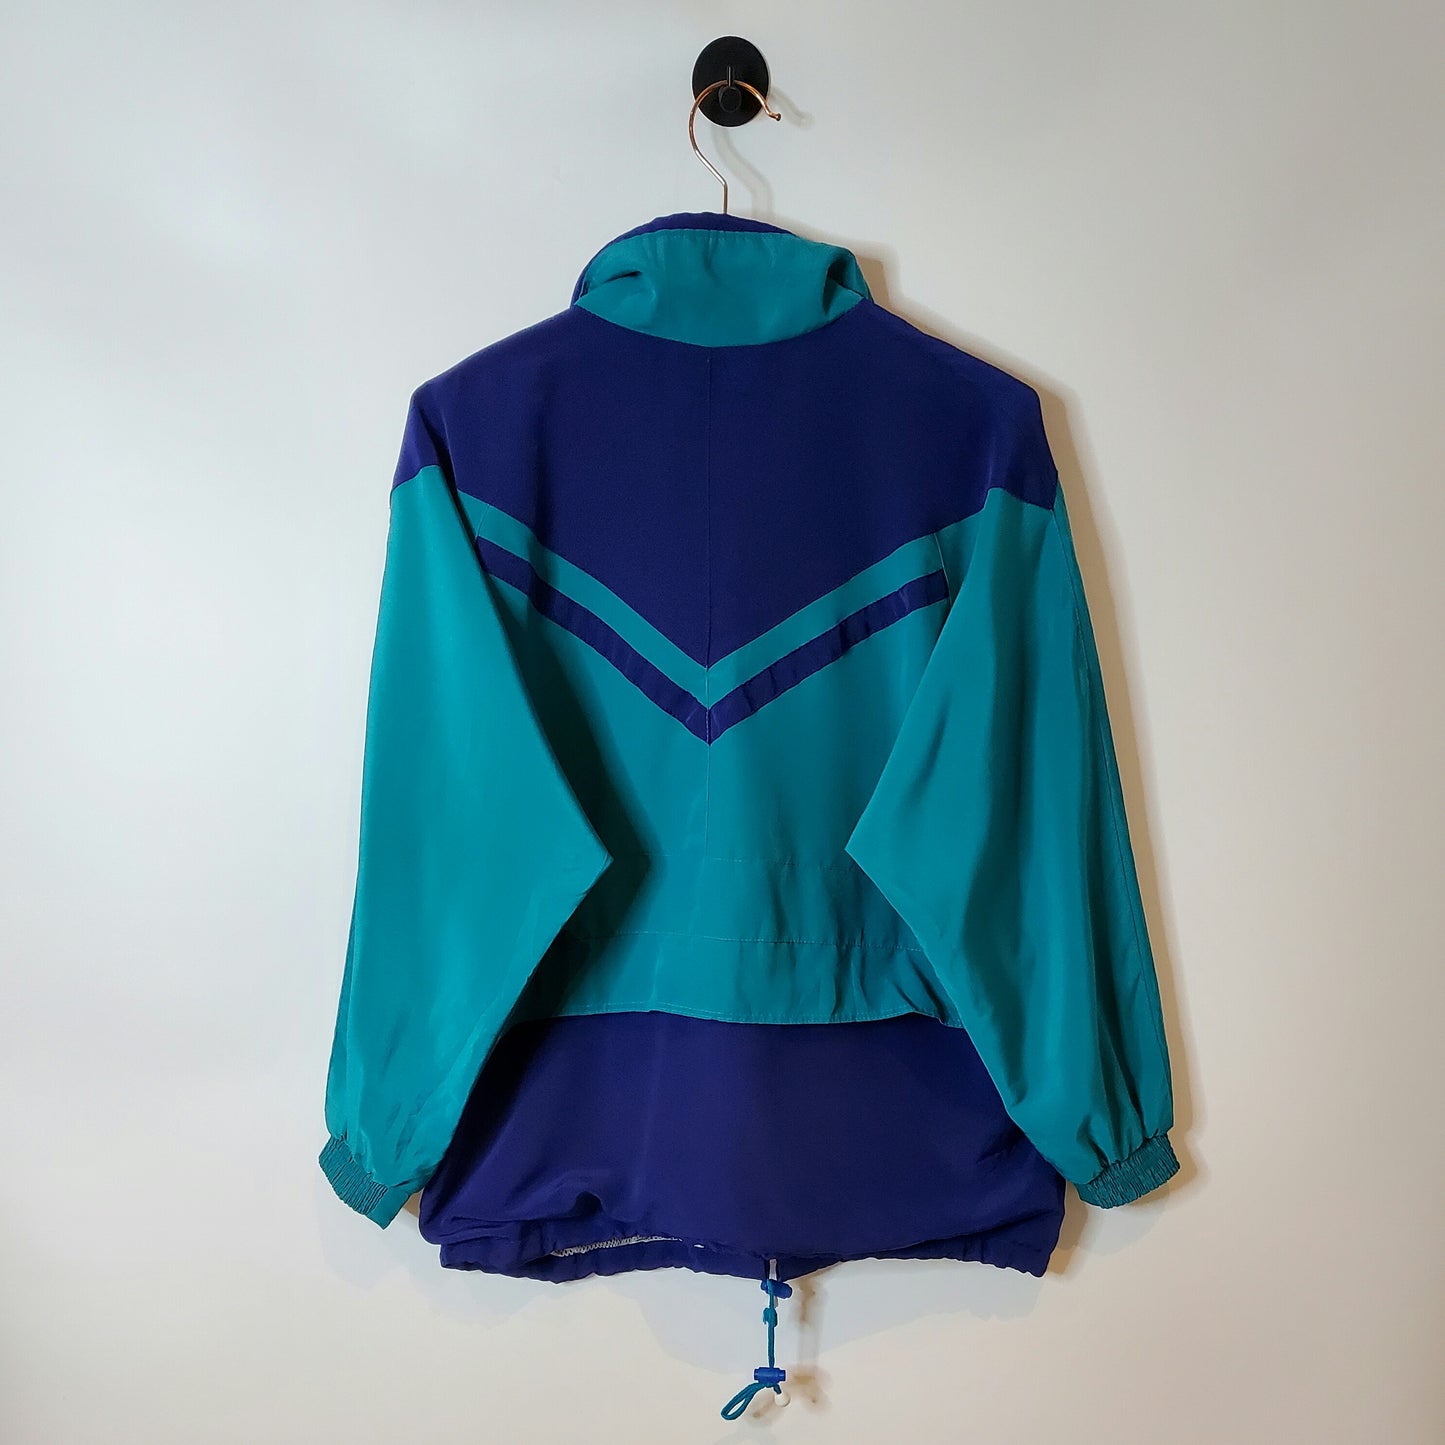 90s Challenge Windbreaker Sports Jacket Blue and Teal Size 12-14